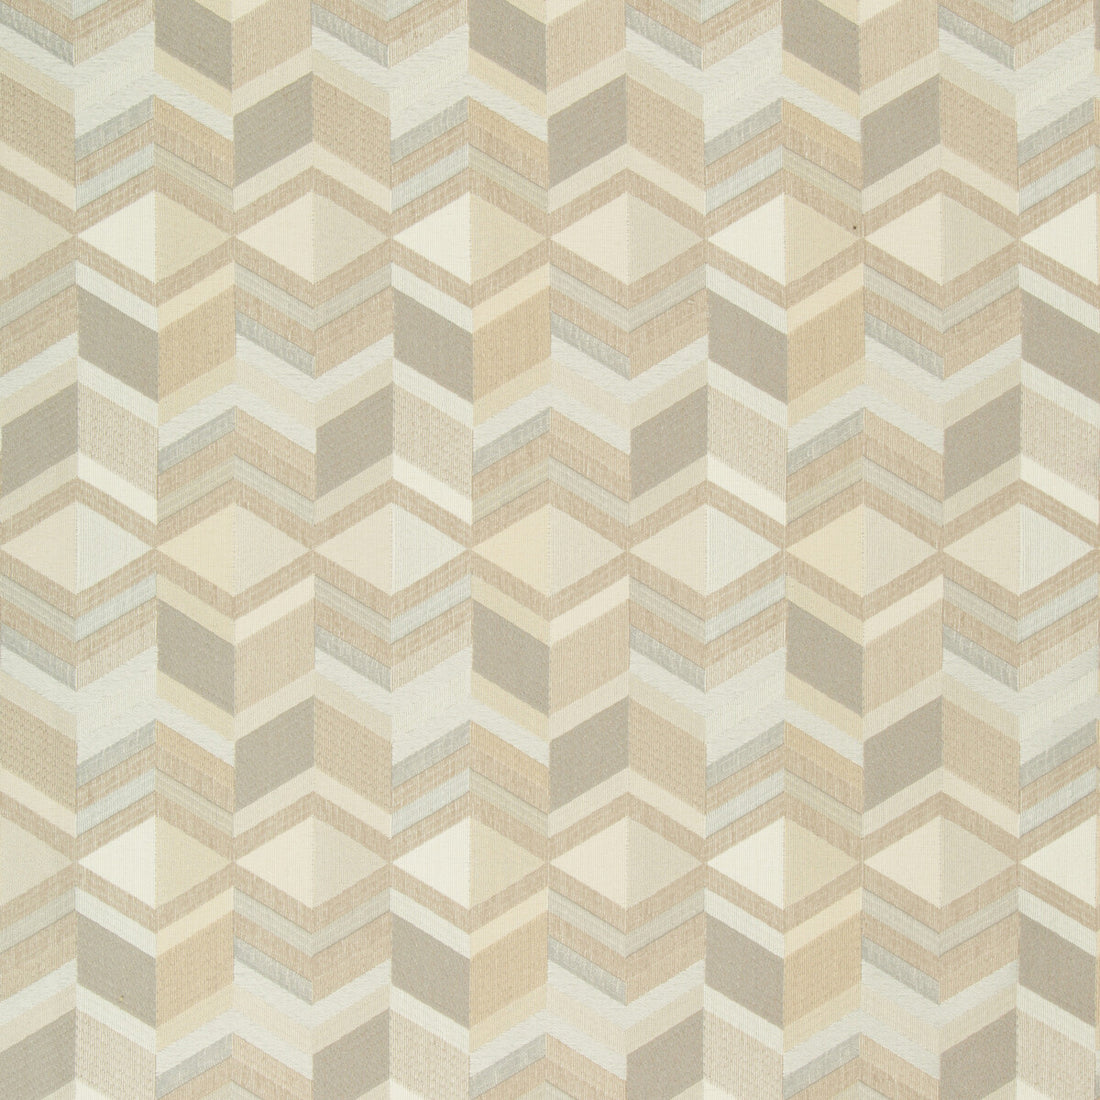 Kravet Design fabric in 35014-1616 color - pattern 35014.1616.0 - by Kravet Design in the Performance Crypton Home collection